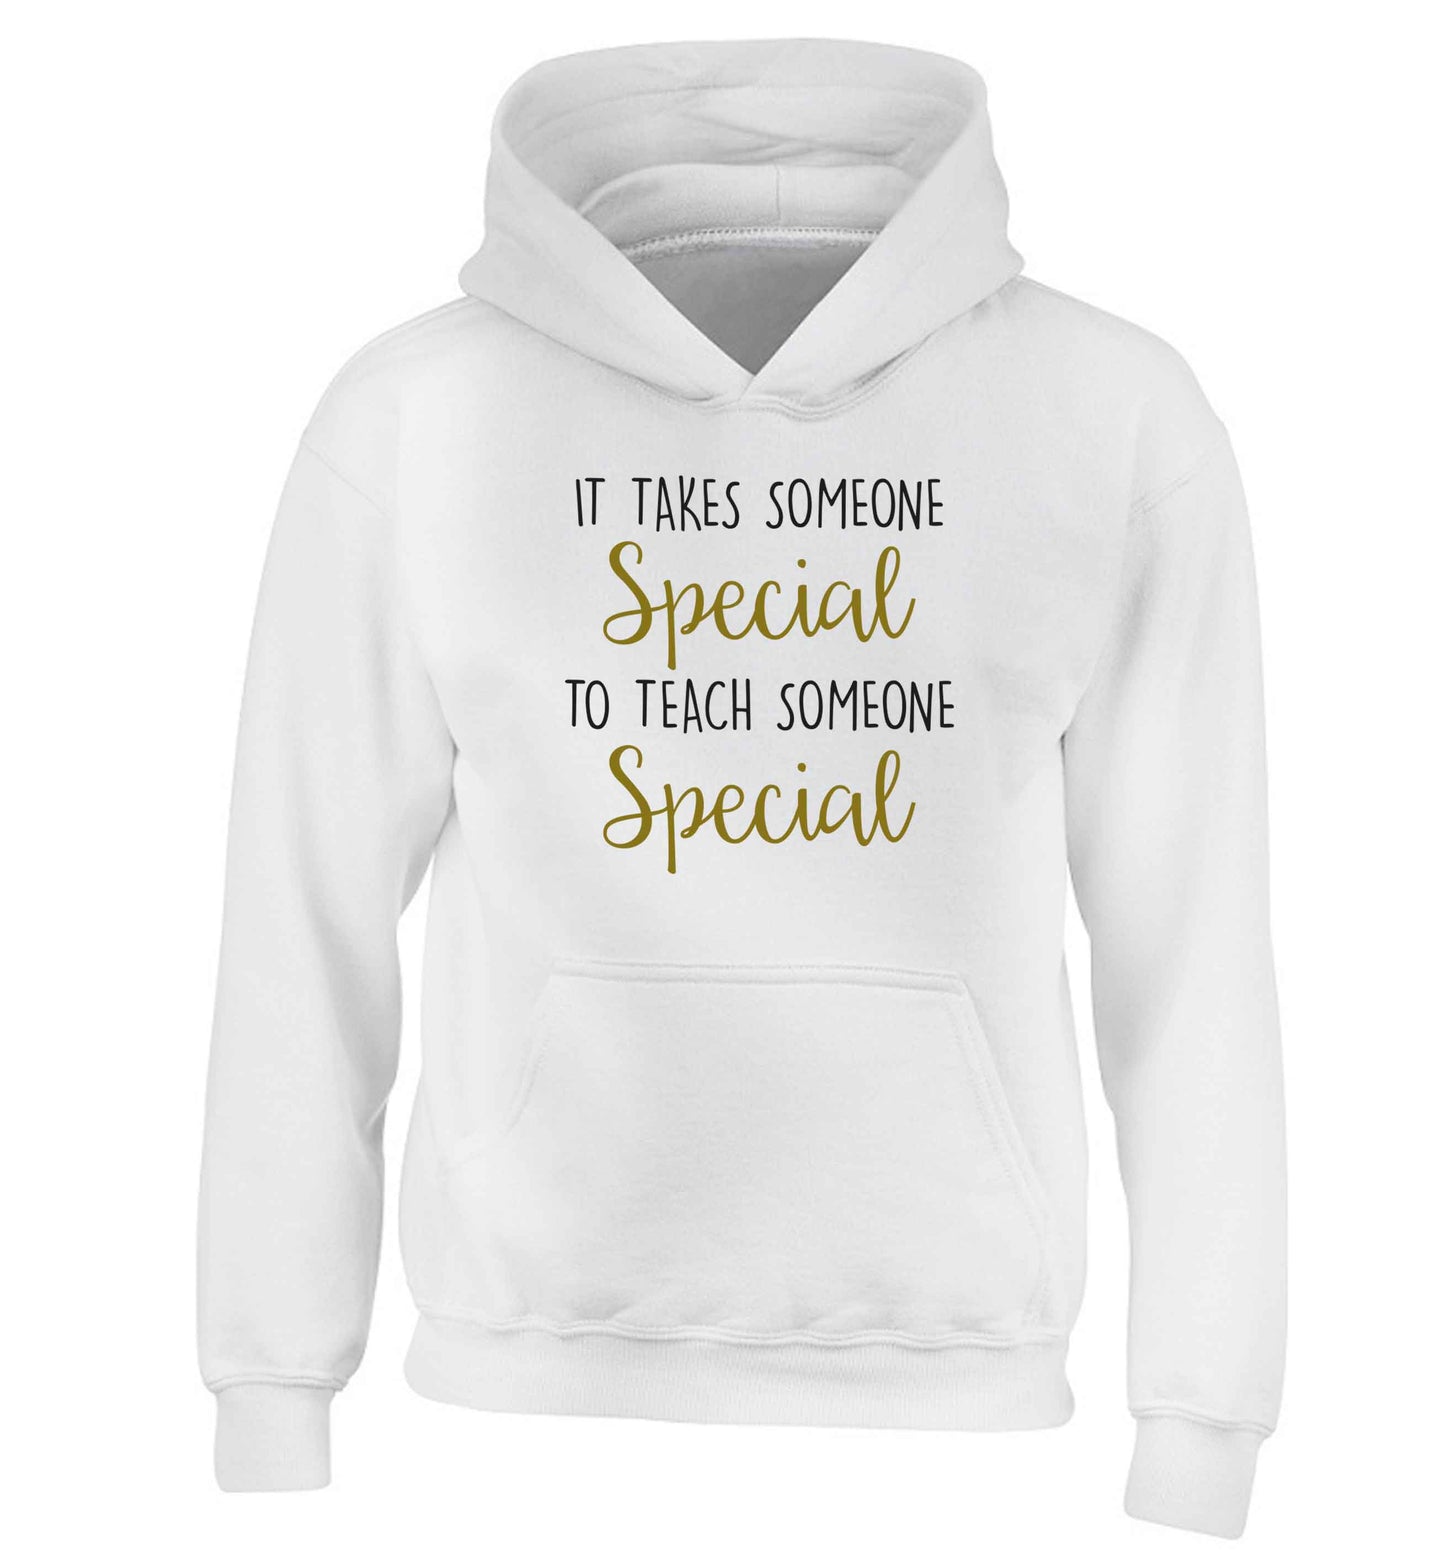 It takes someone special to teach someone special children's white hoodie 12-13 Years